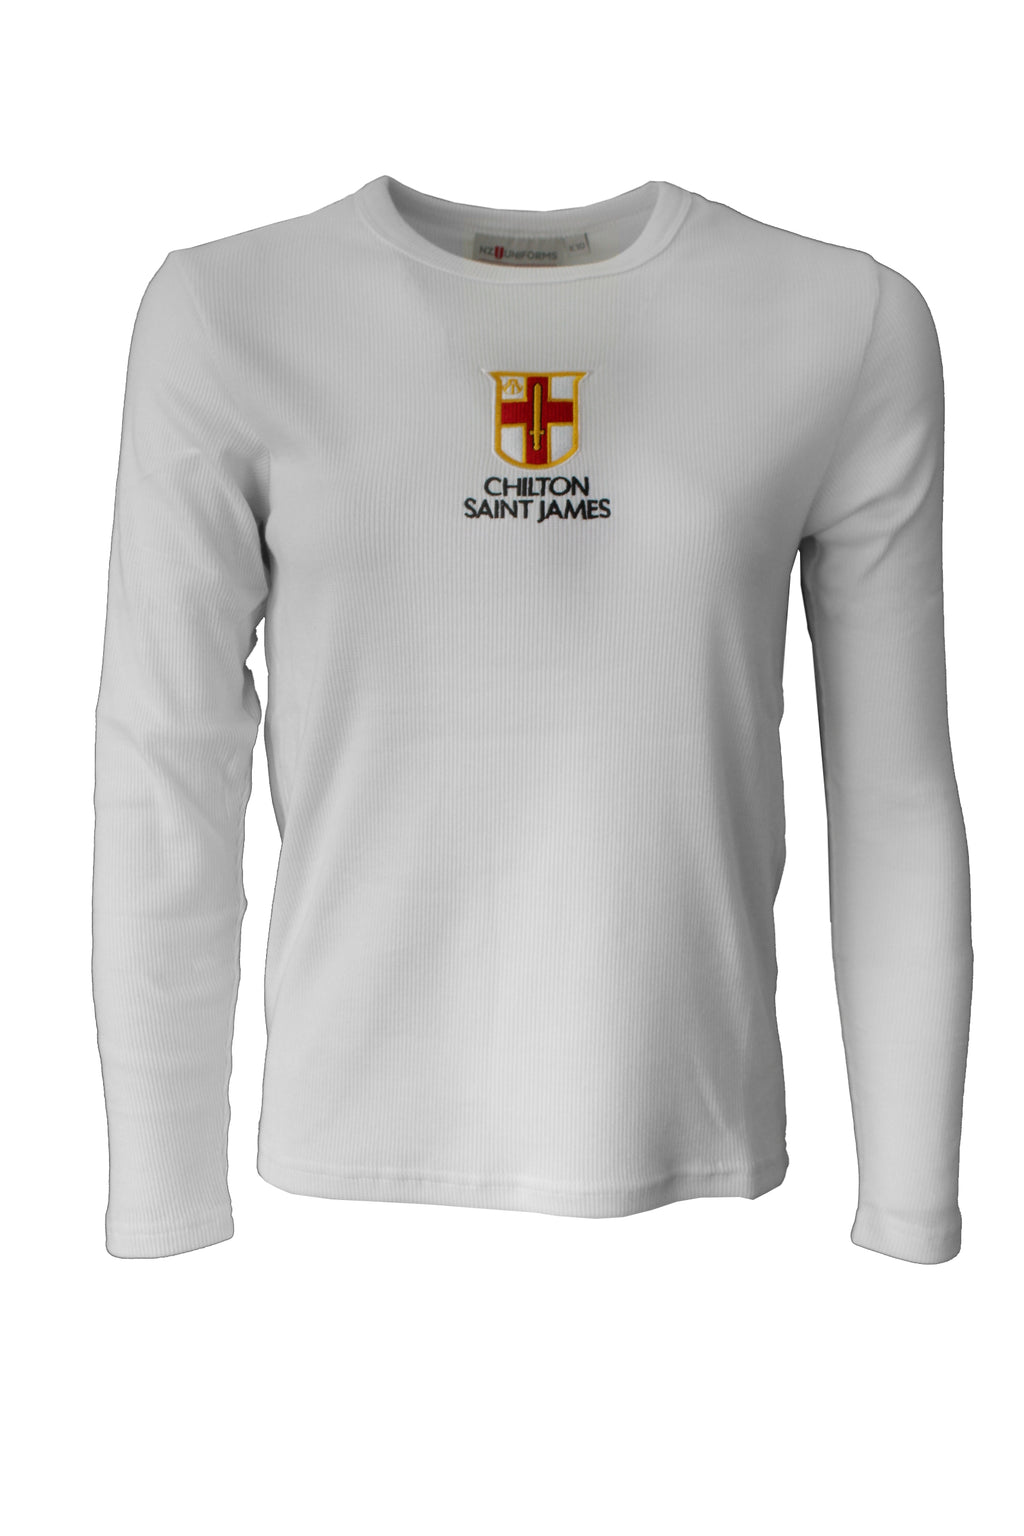 Crested White T-Shirt Long Sleeve